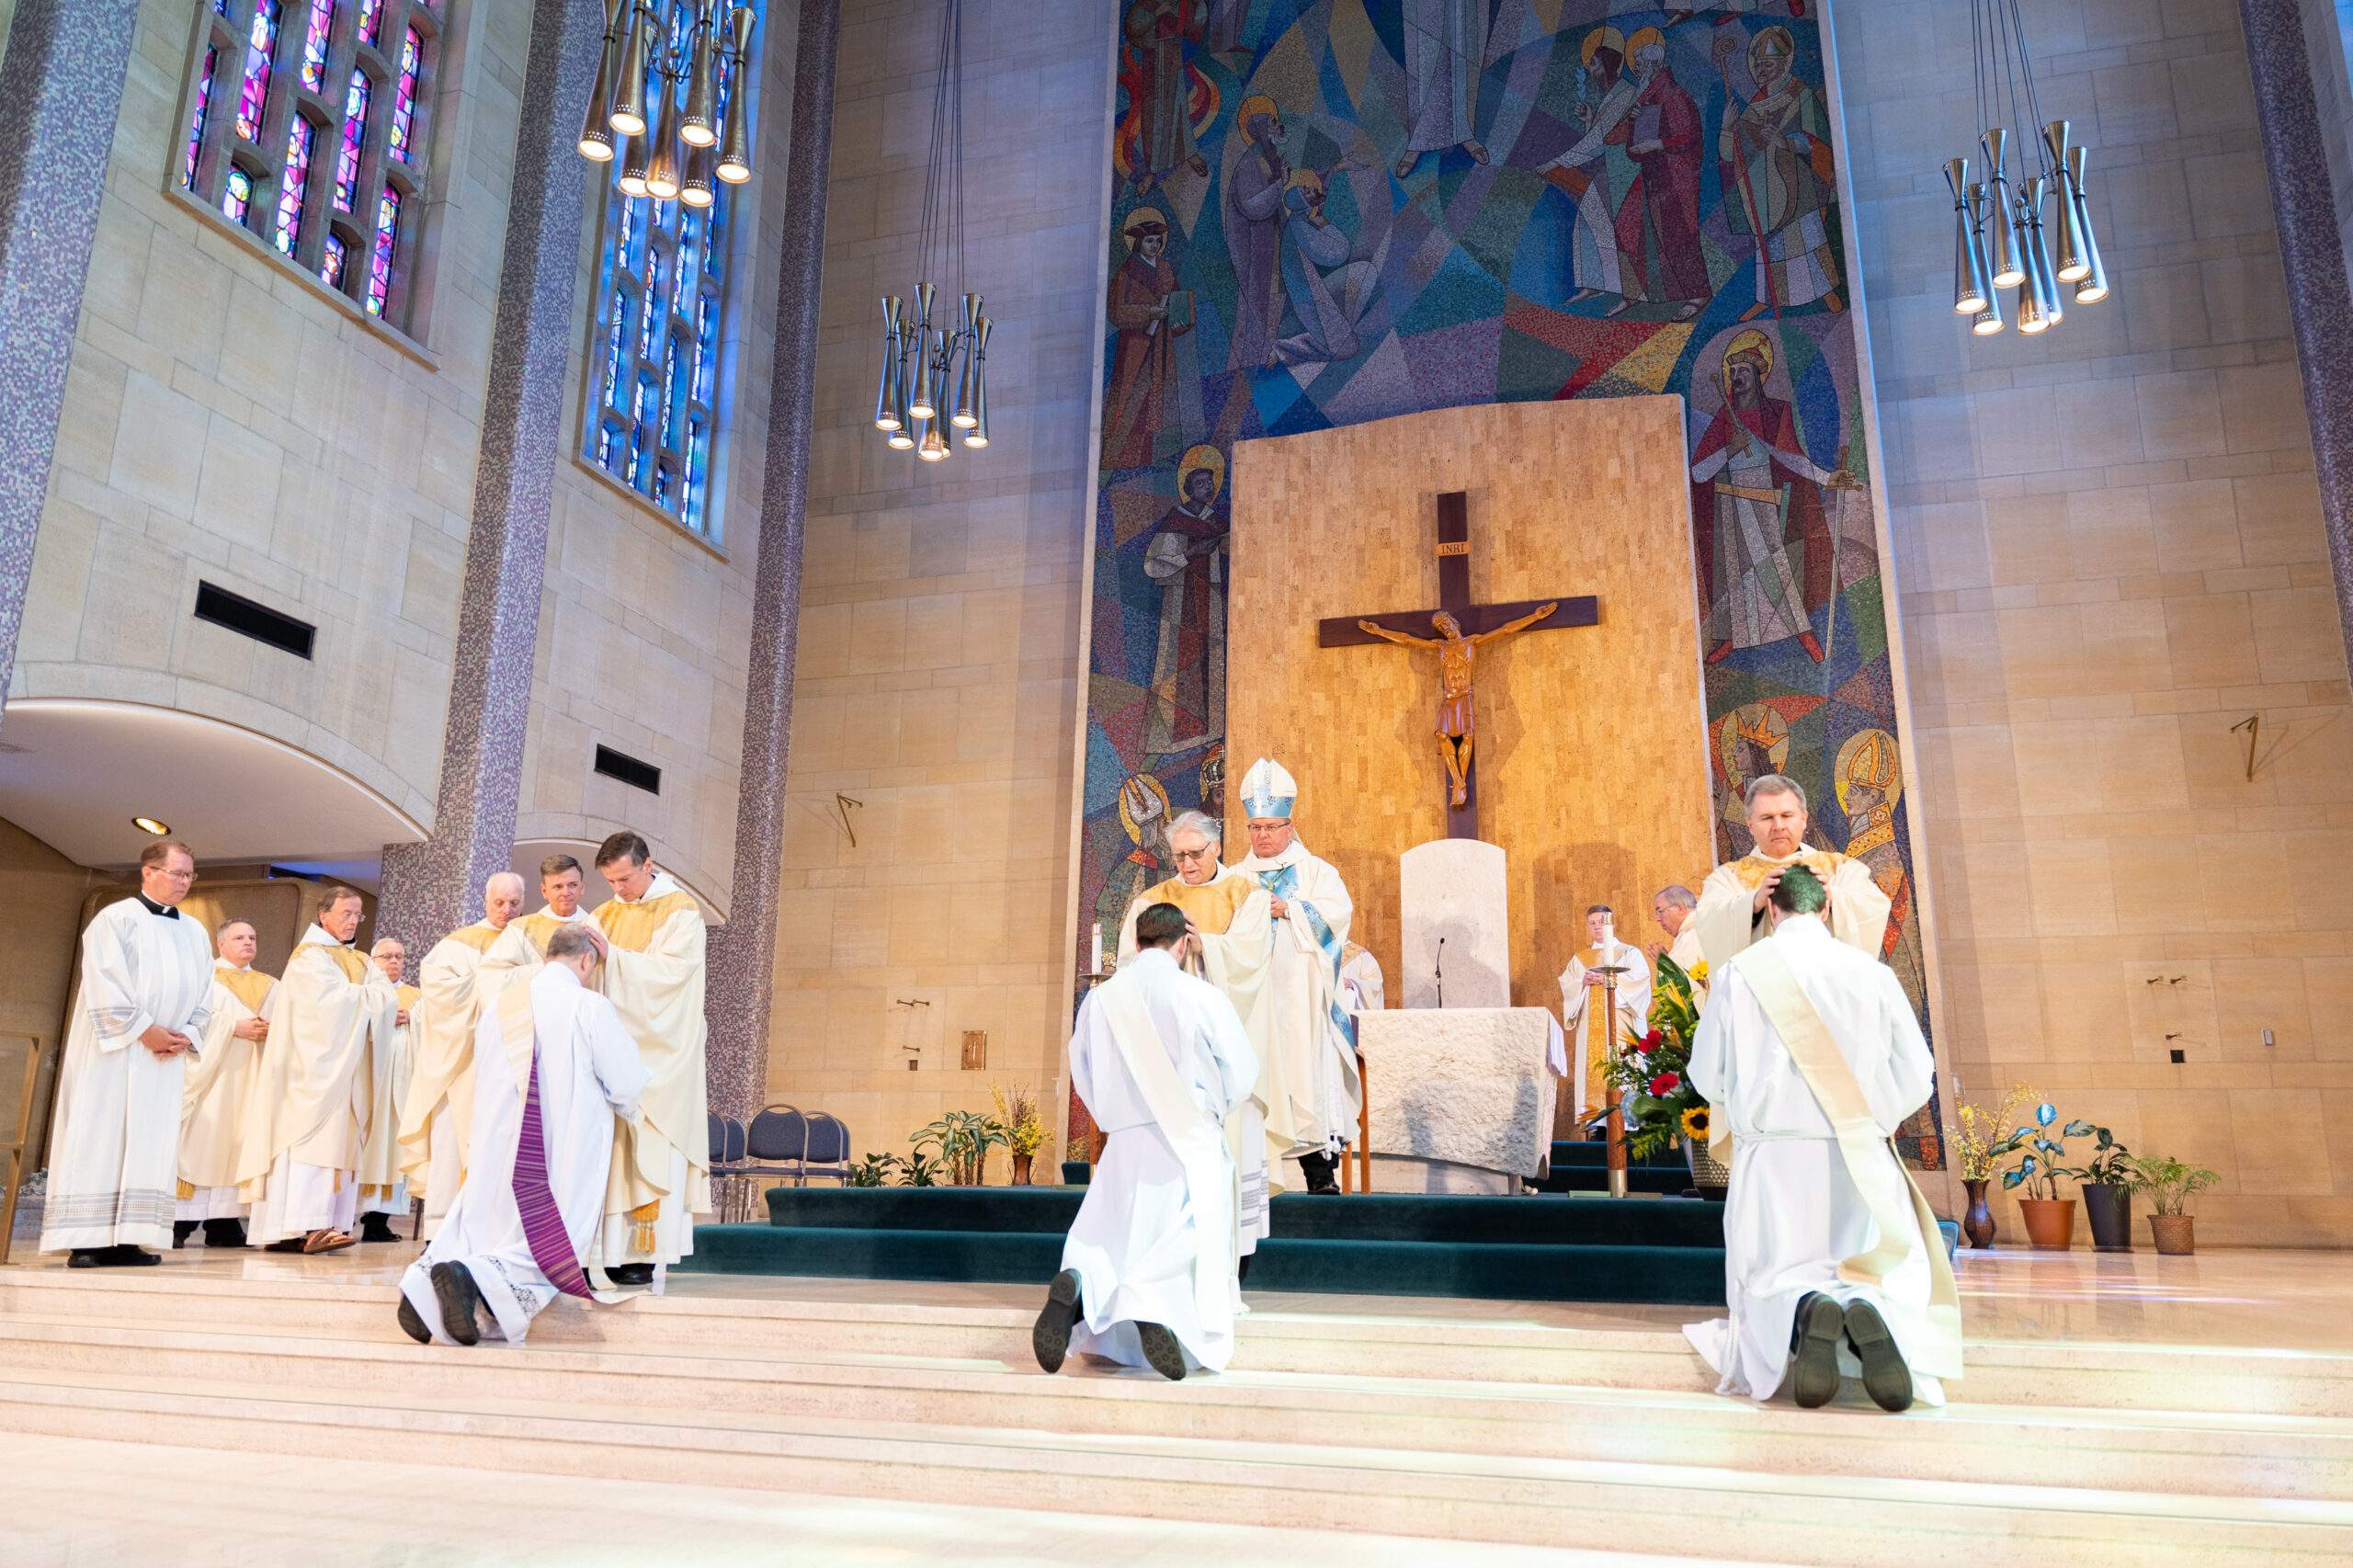 their hands upon the ordinands, signifying the unity of the priesthood. Photo by Brian Keith